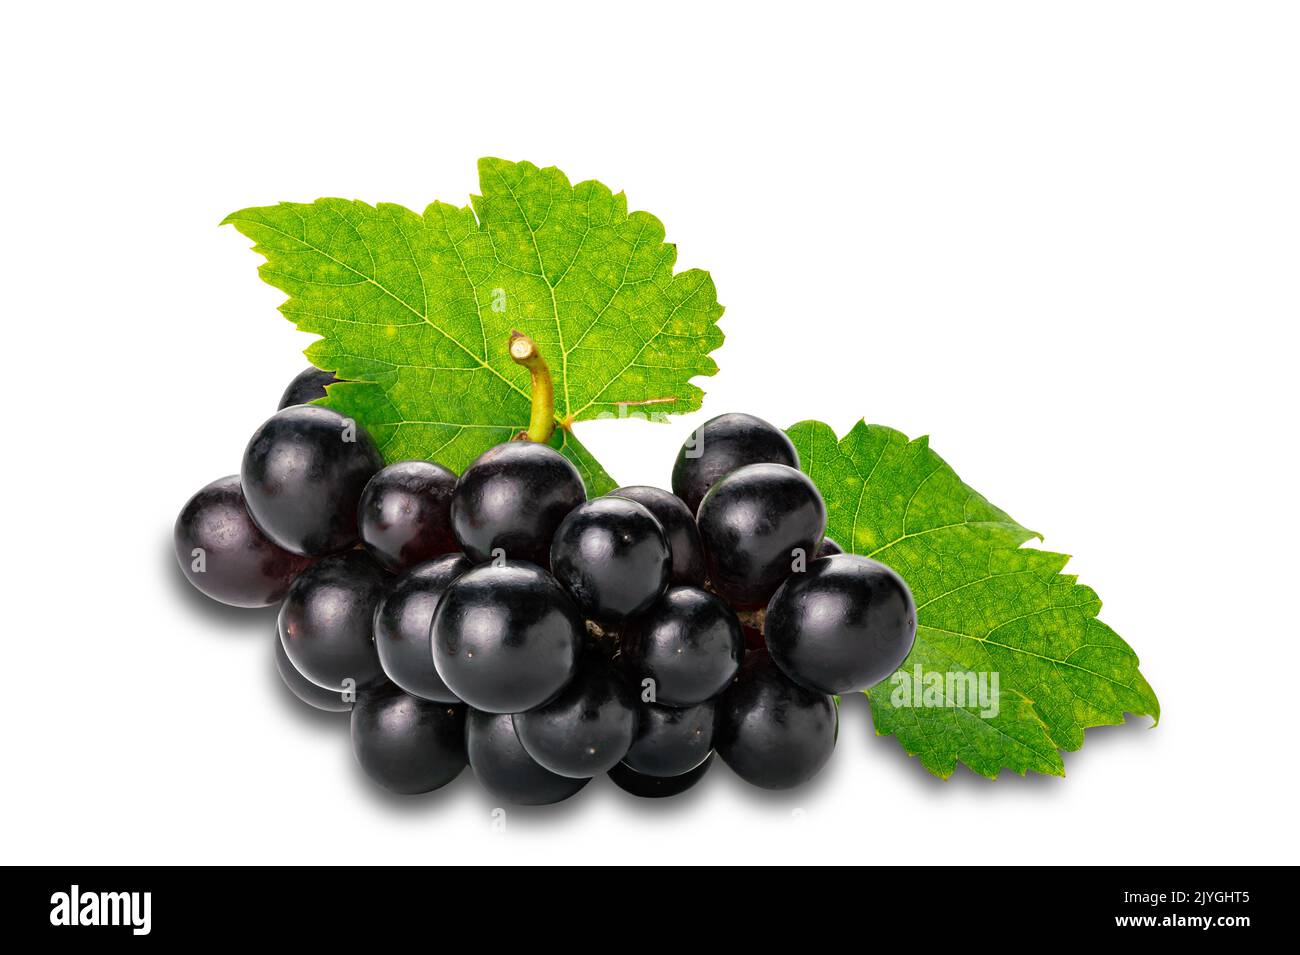 Bunch of ripe black grapes with green leaf isolated on white background with clipping path. Stock Photo